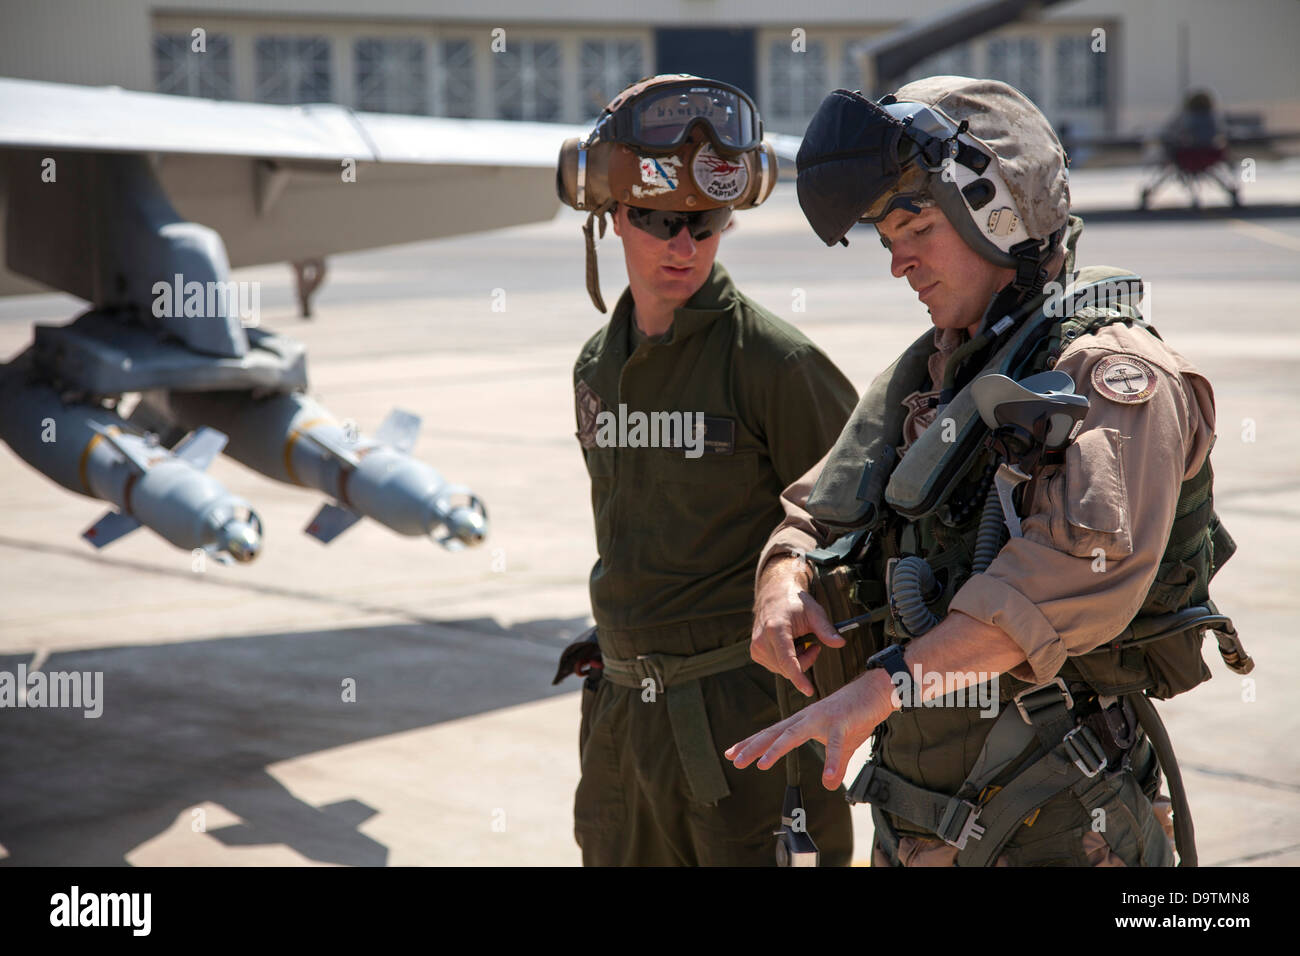 Marine Captain Matthew ”Toggaf” Holcomb (right) from the VMFA-115 squadron discusses aircraft maneuvers with his plane captain, Stock Photo